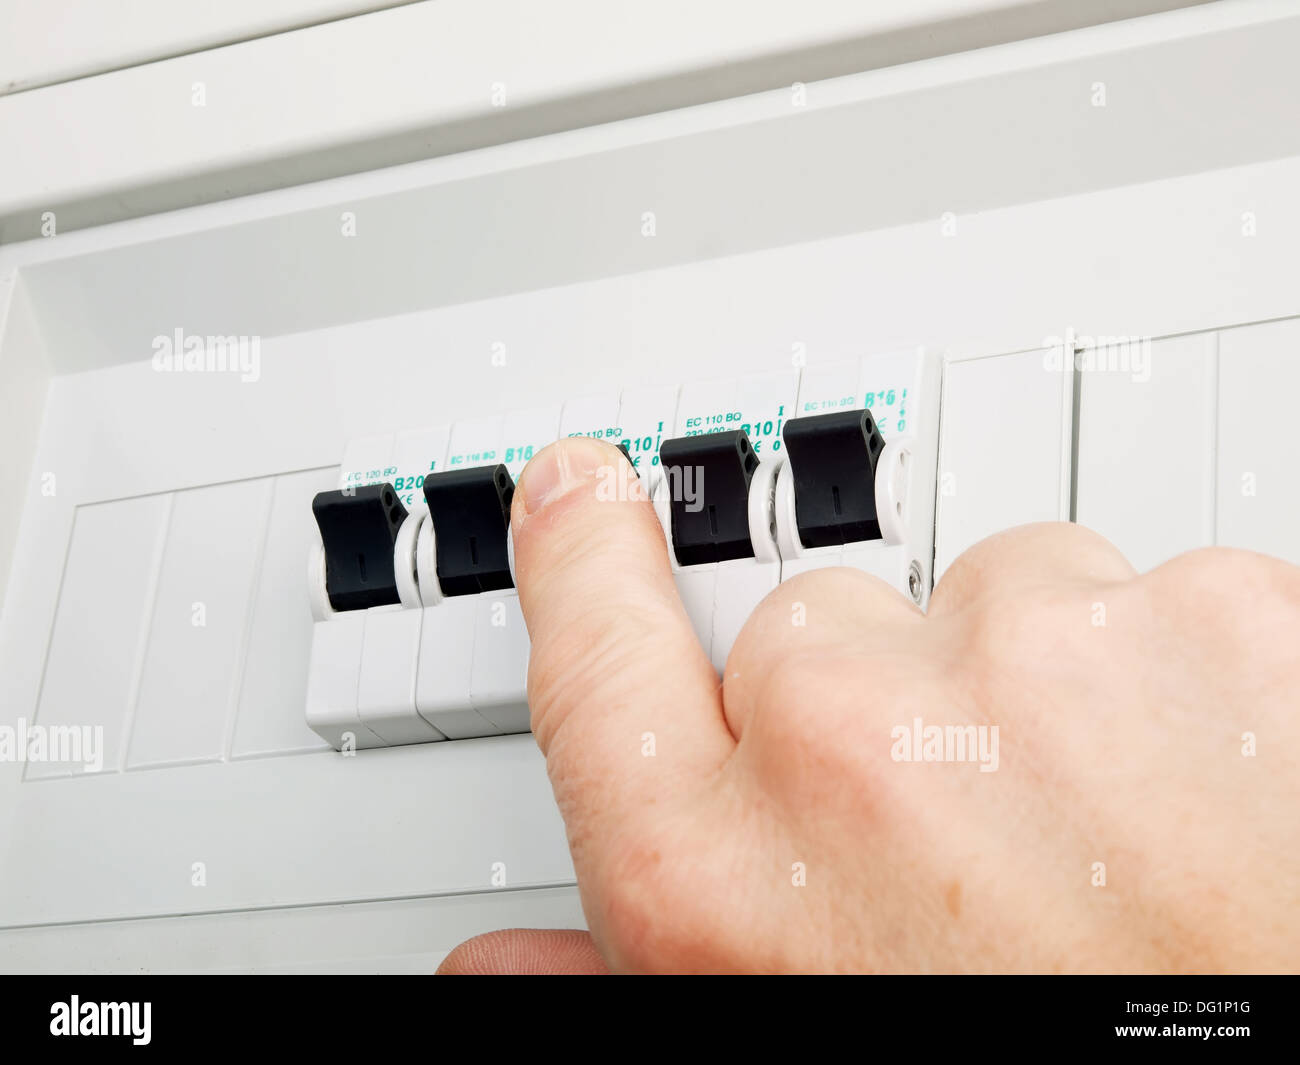 fuse switch on and electrical fusebox Stock Photo